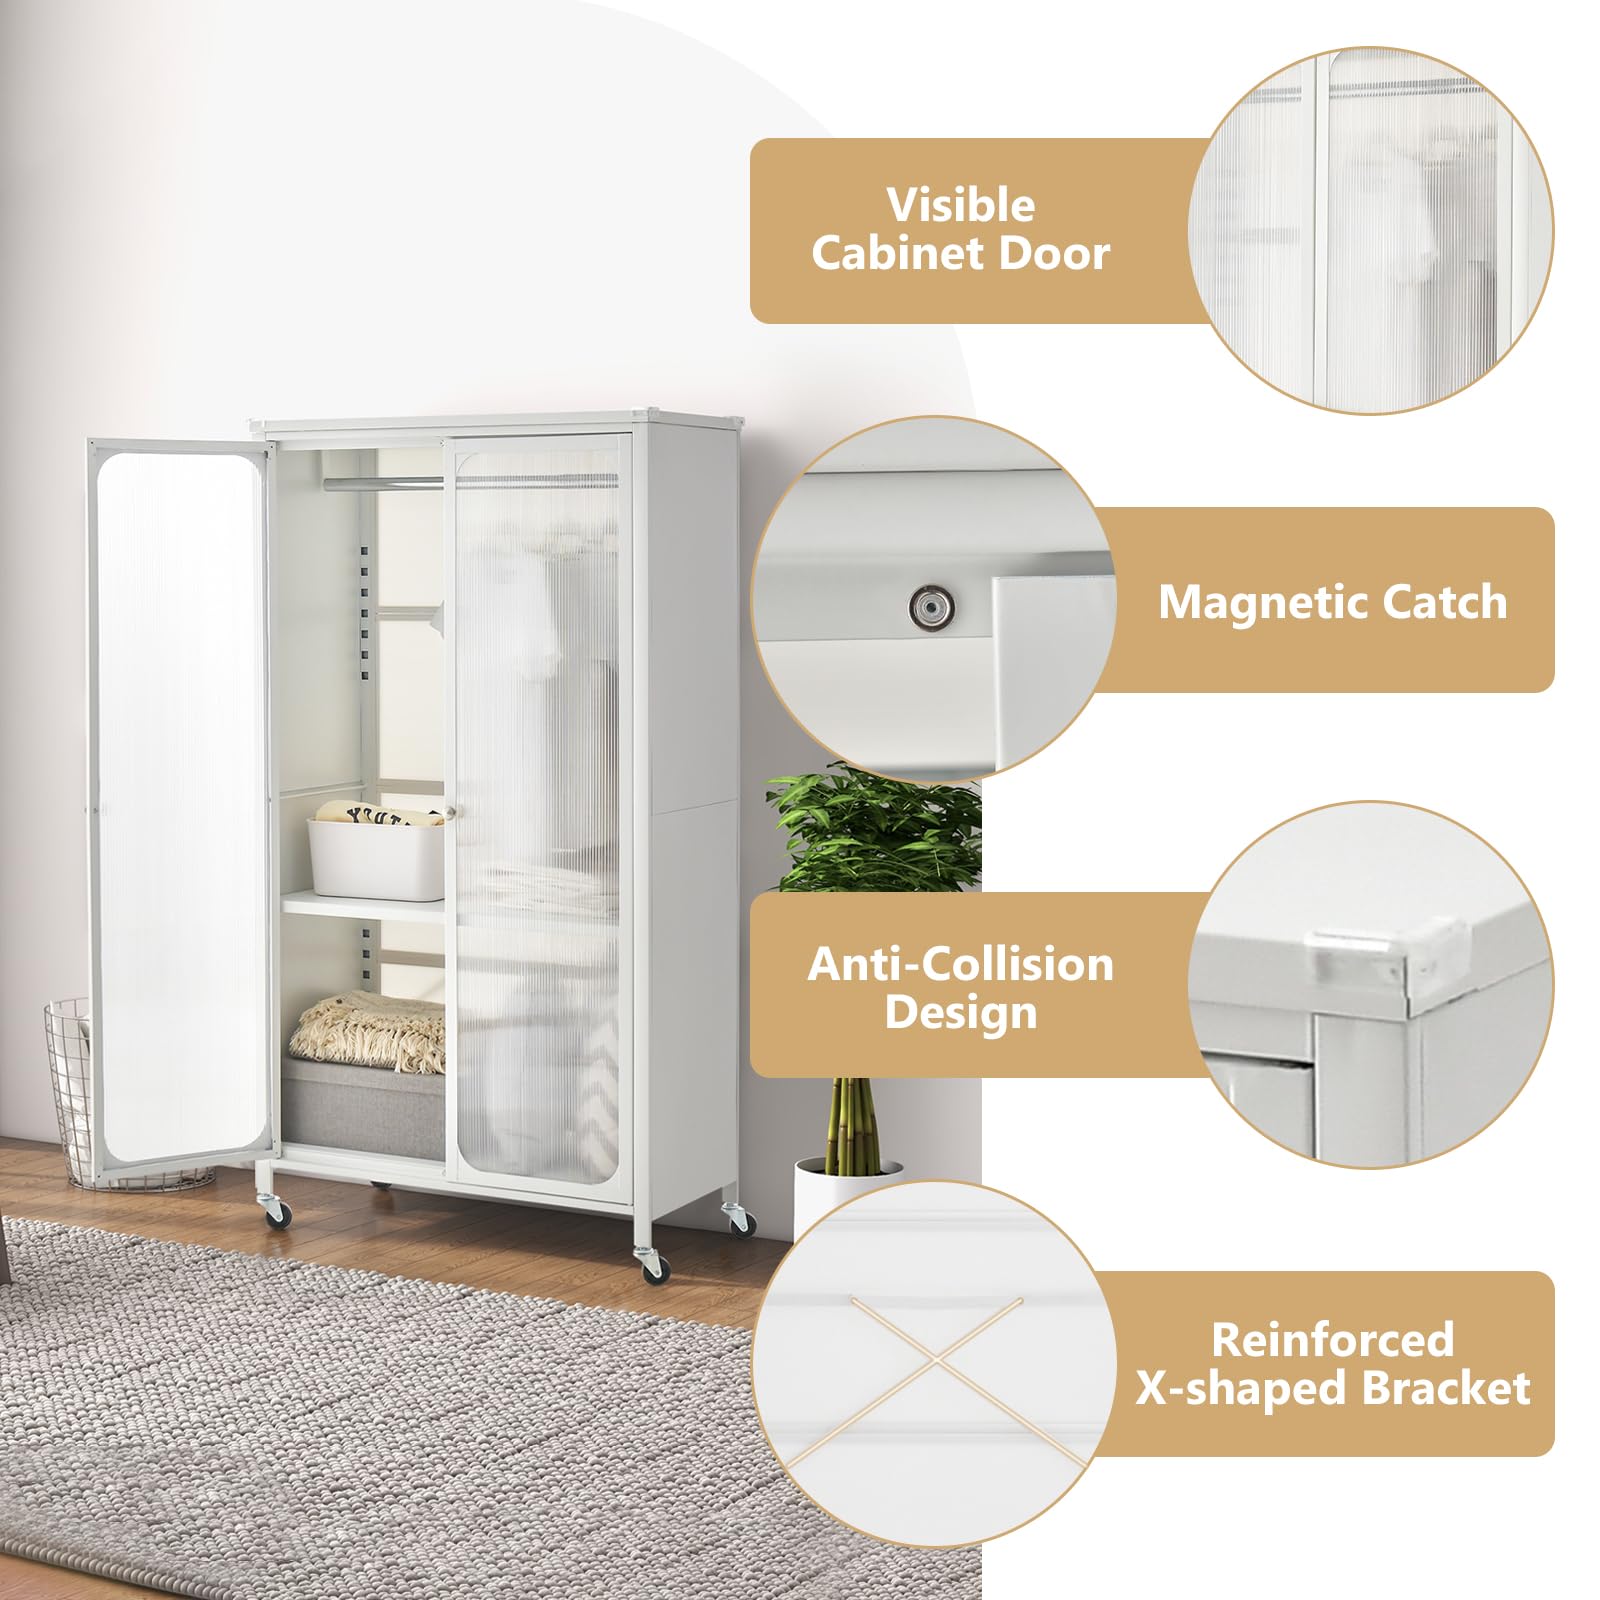 Portable Closet with Rollers, Mobile Metal Armoire Closet with Hanging Rod